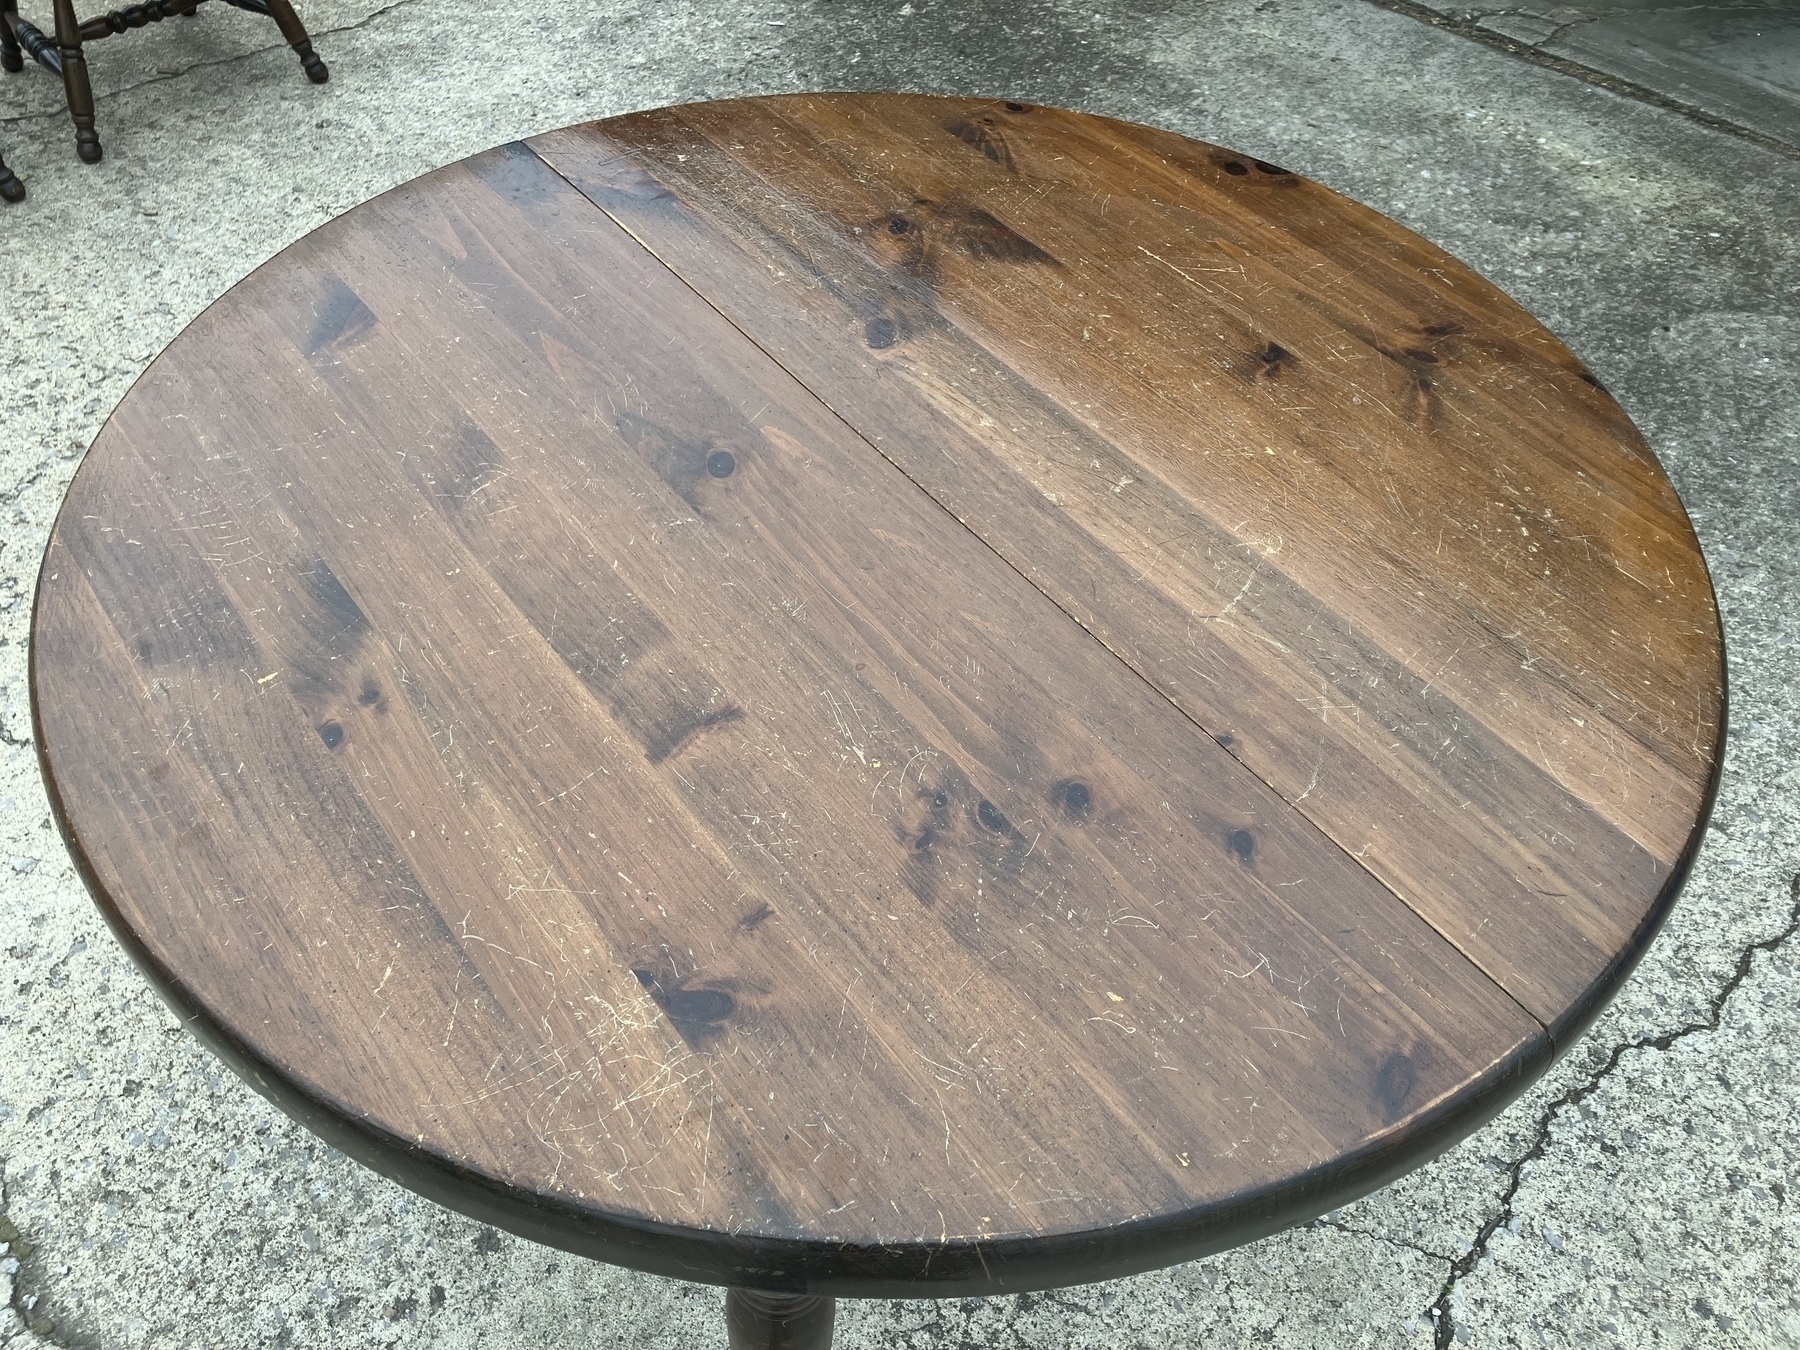 Auto-generated description: A round, wooden table with a slightly worn surface is set on a concrete floor.